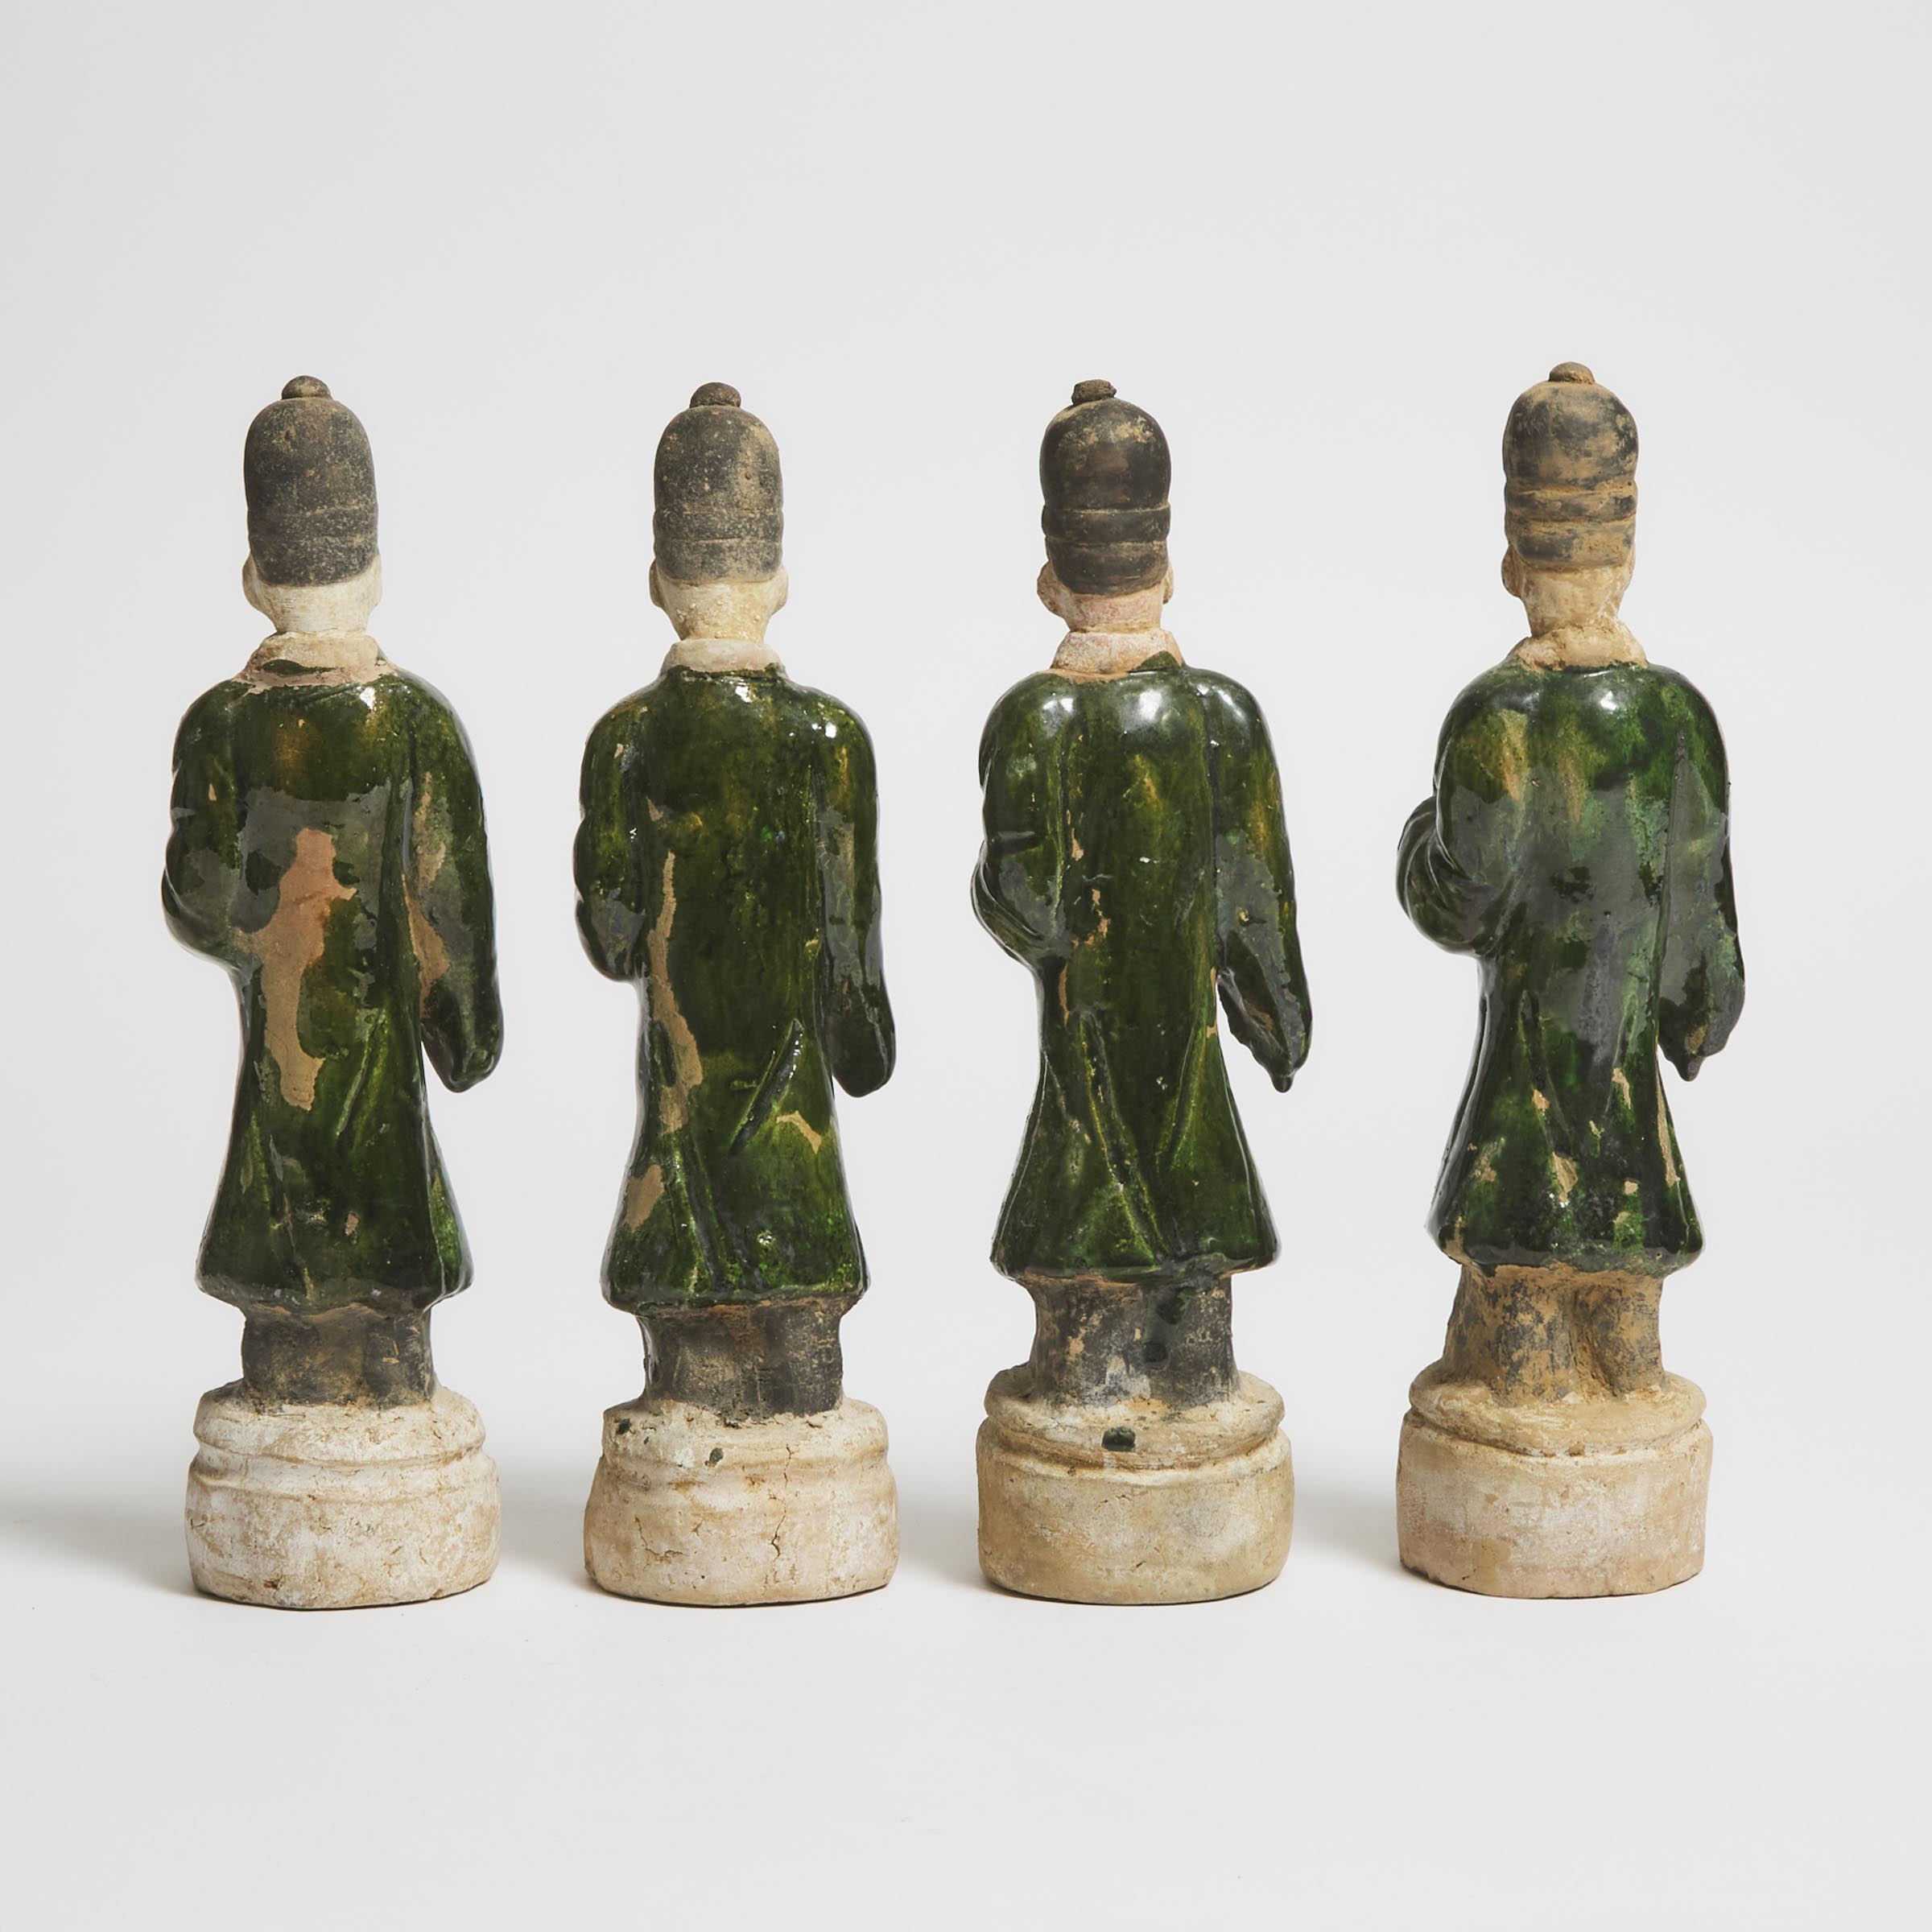 A Group of Four Green-Glazed Pottery Figures, Ming Dynasty (1368-1644)